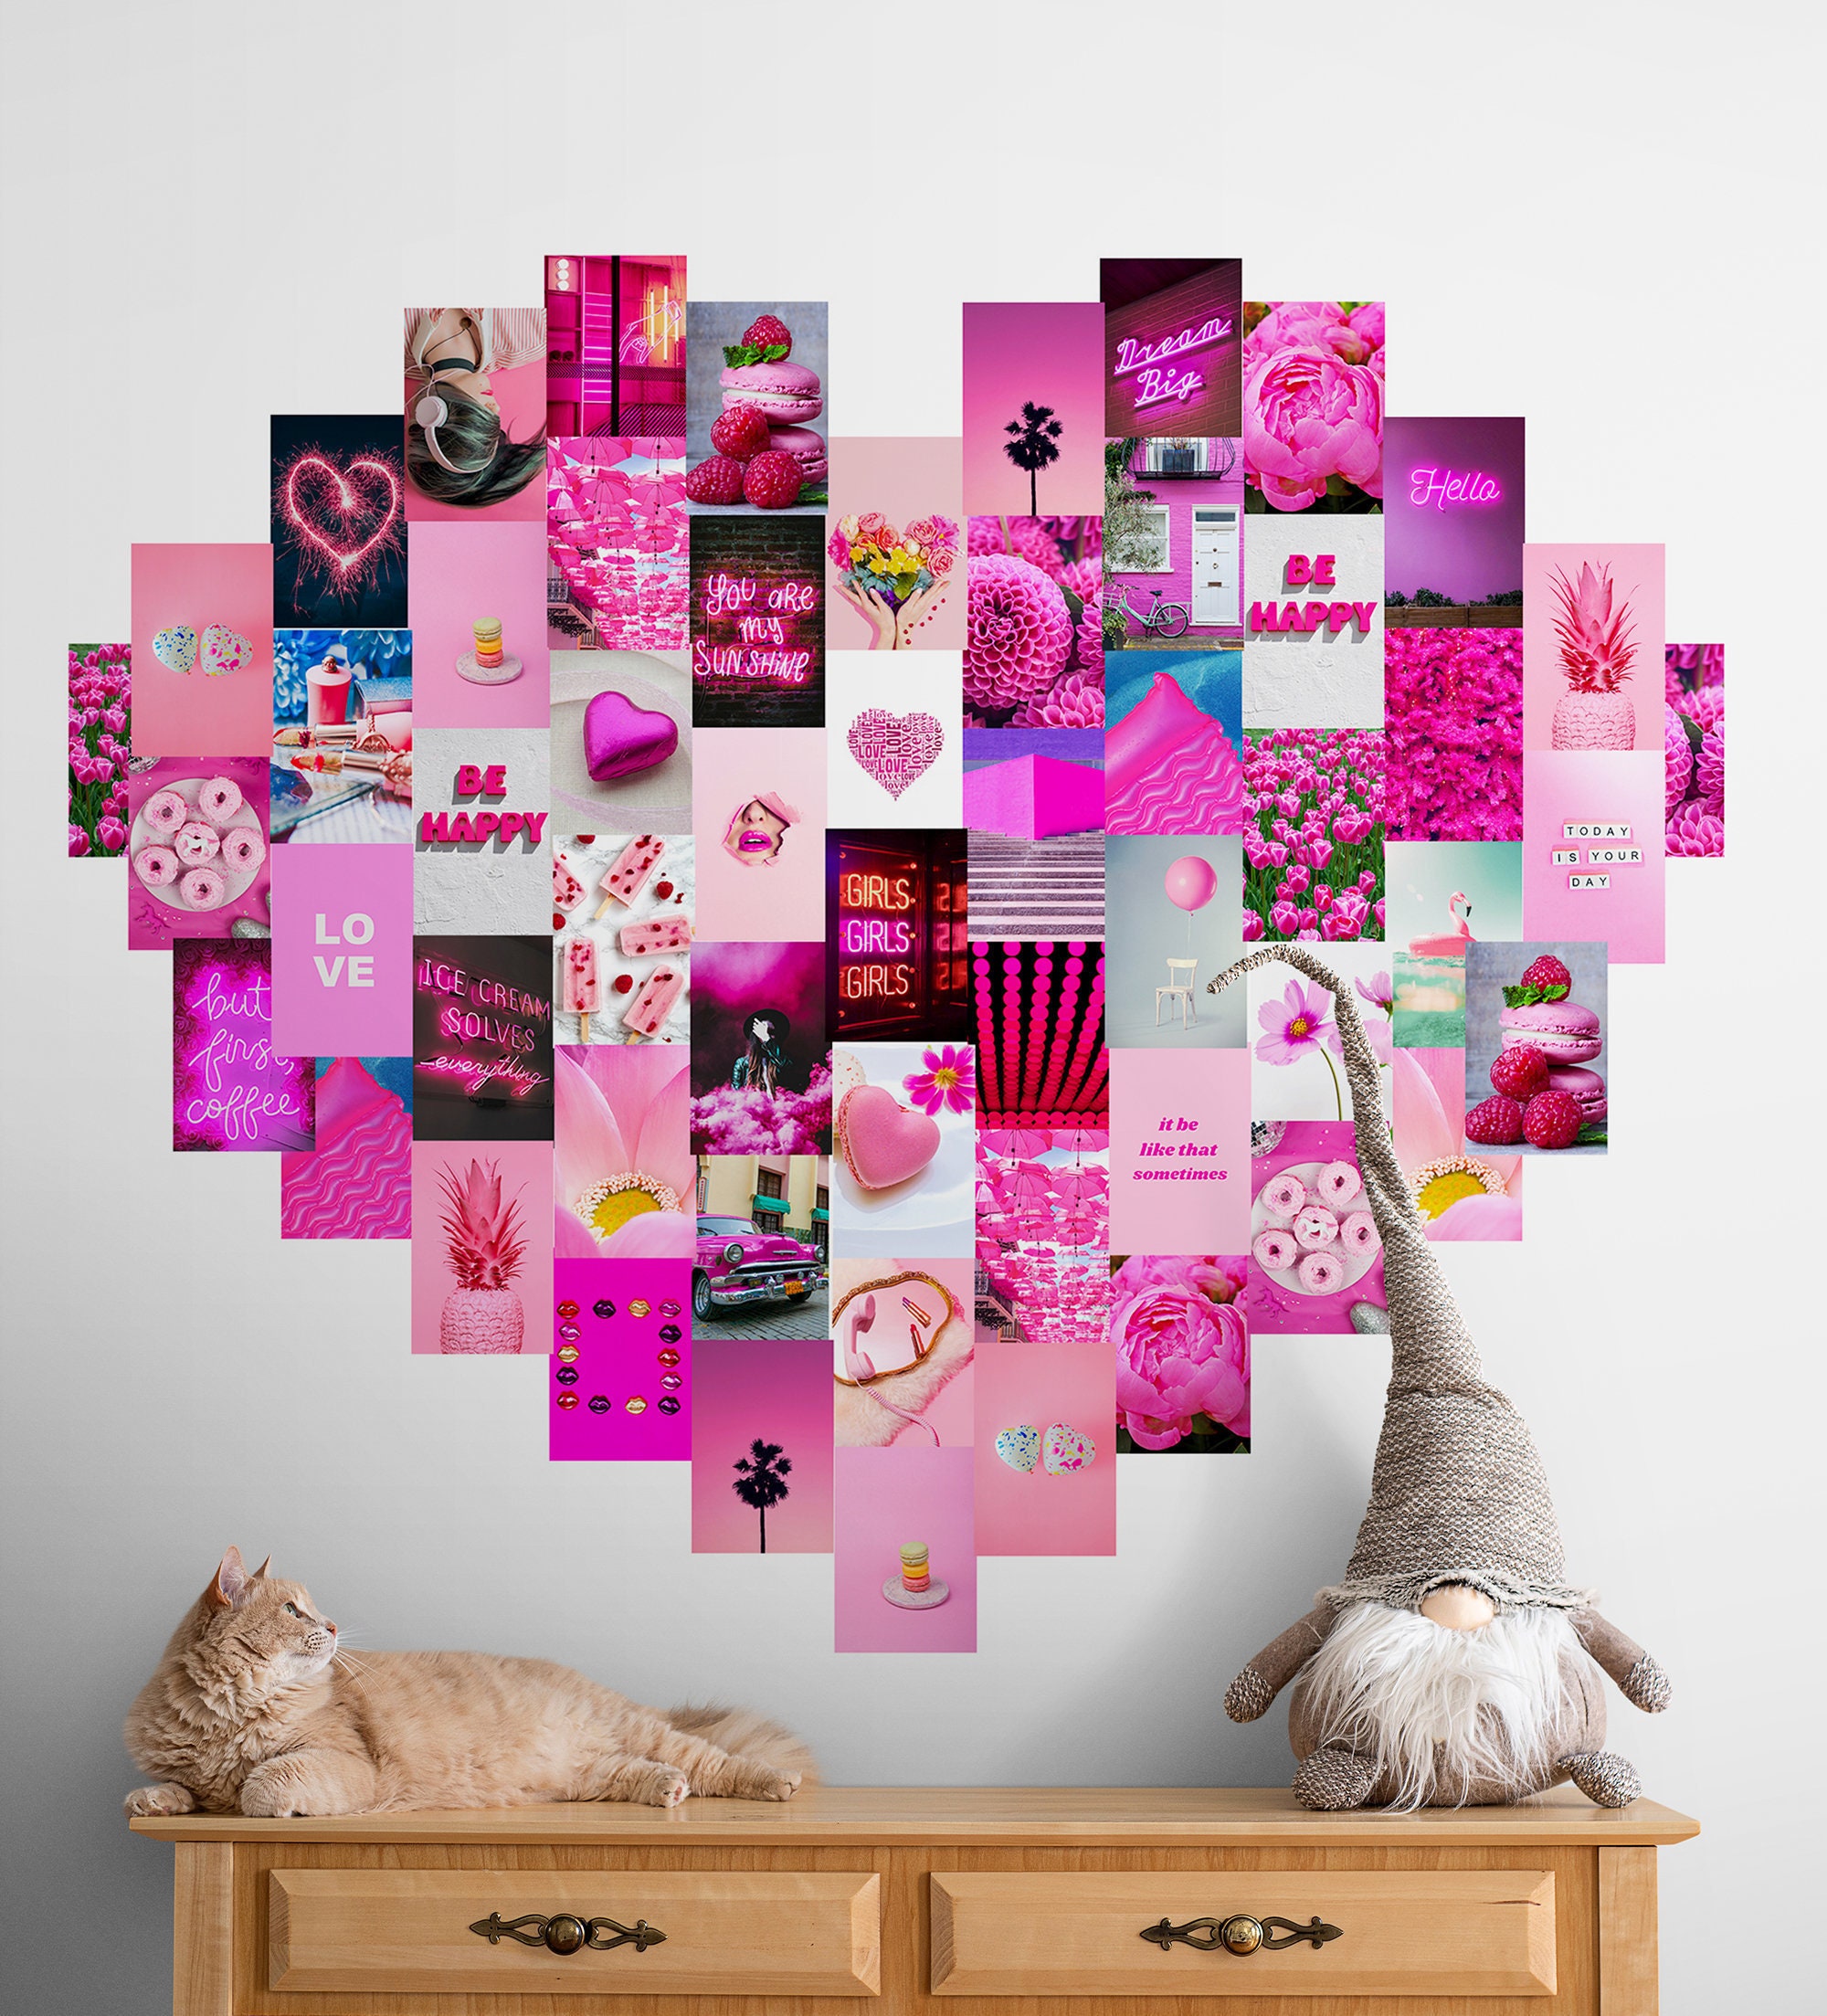 Wander More Wall Collage Kit Aesthetic Home Gifts for Her Pink Photo  Collage Kit Wall Decor Art 50 Printed Photos 